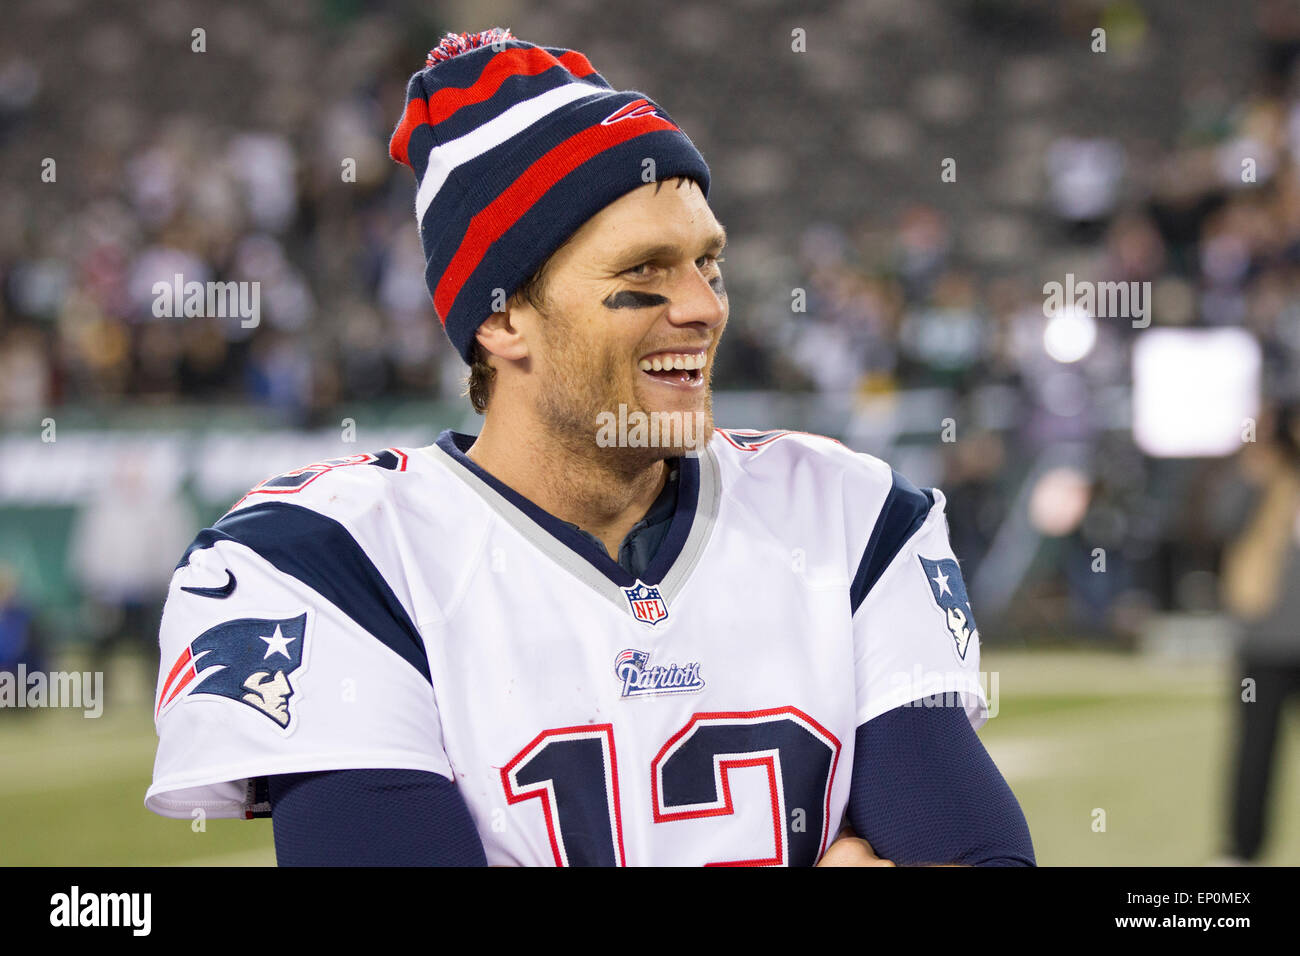 May 11, 2015 - FILE PHOTO - New England Patriots quaterback Tom Brady (12) suspended four games for punishment deflating footballs in the AFC Championship game. Pictured: May 11, 2015 - FILE PHOTO - New England Patriots quaterback Tom Brady (12) suspended four games for punishment deflating footballs in the AFC Championship game. Pictured: November 22, 2012: New England Patriots quarterback Tom Brady (12) looks on with a knit cap on following the NFL Thanksgiving Day game between the New England Patriots and the New York Jets at MetLife Stadium in East Rutherford, New Jersey. The New England P Stock Photo